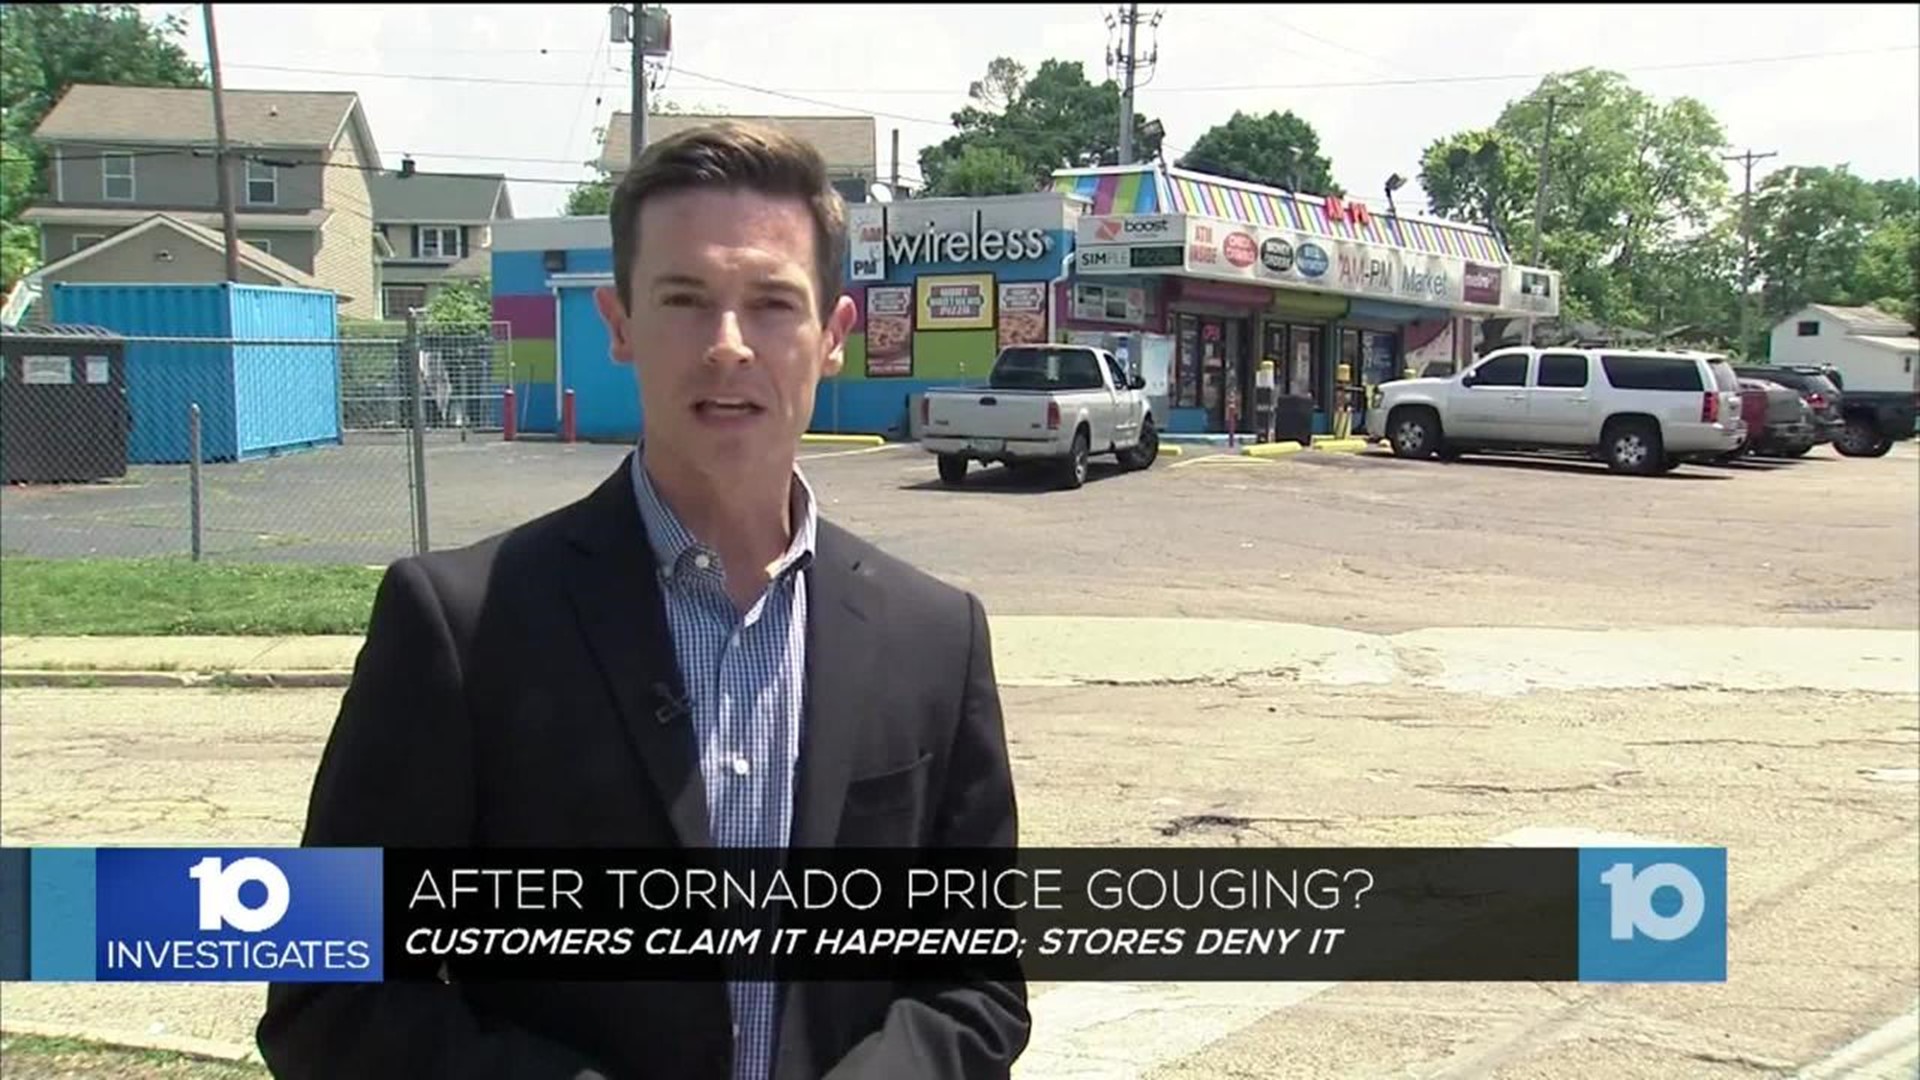 Dayton-area customers complain to Ohio AG of alleged post-tornado price gouging; stores deny it